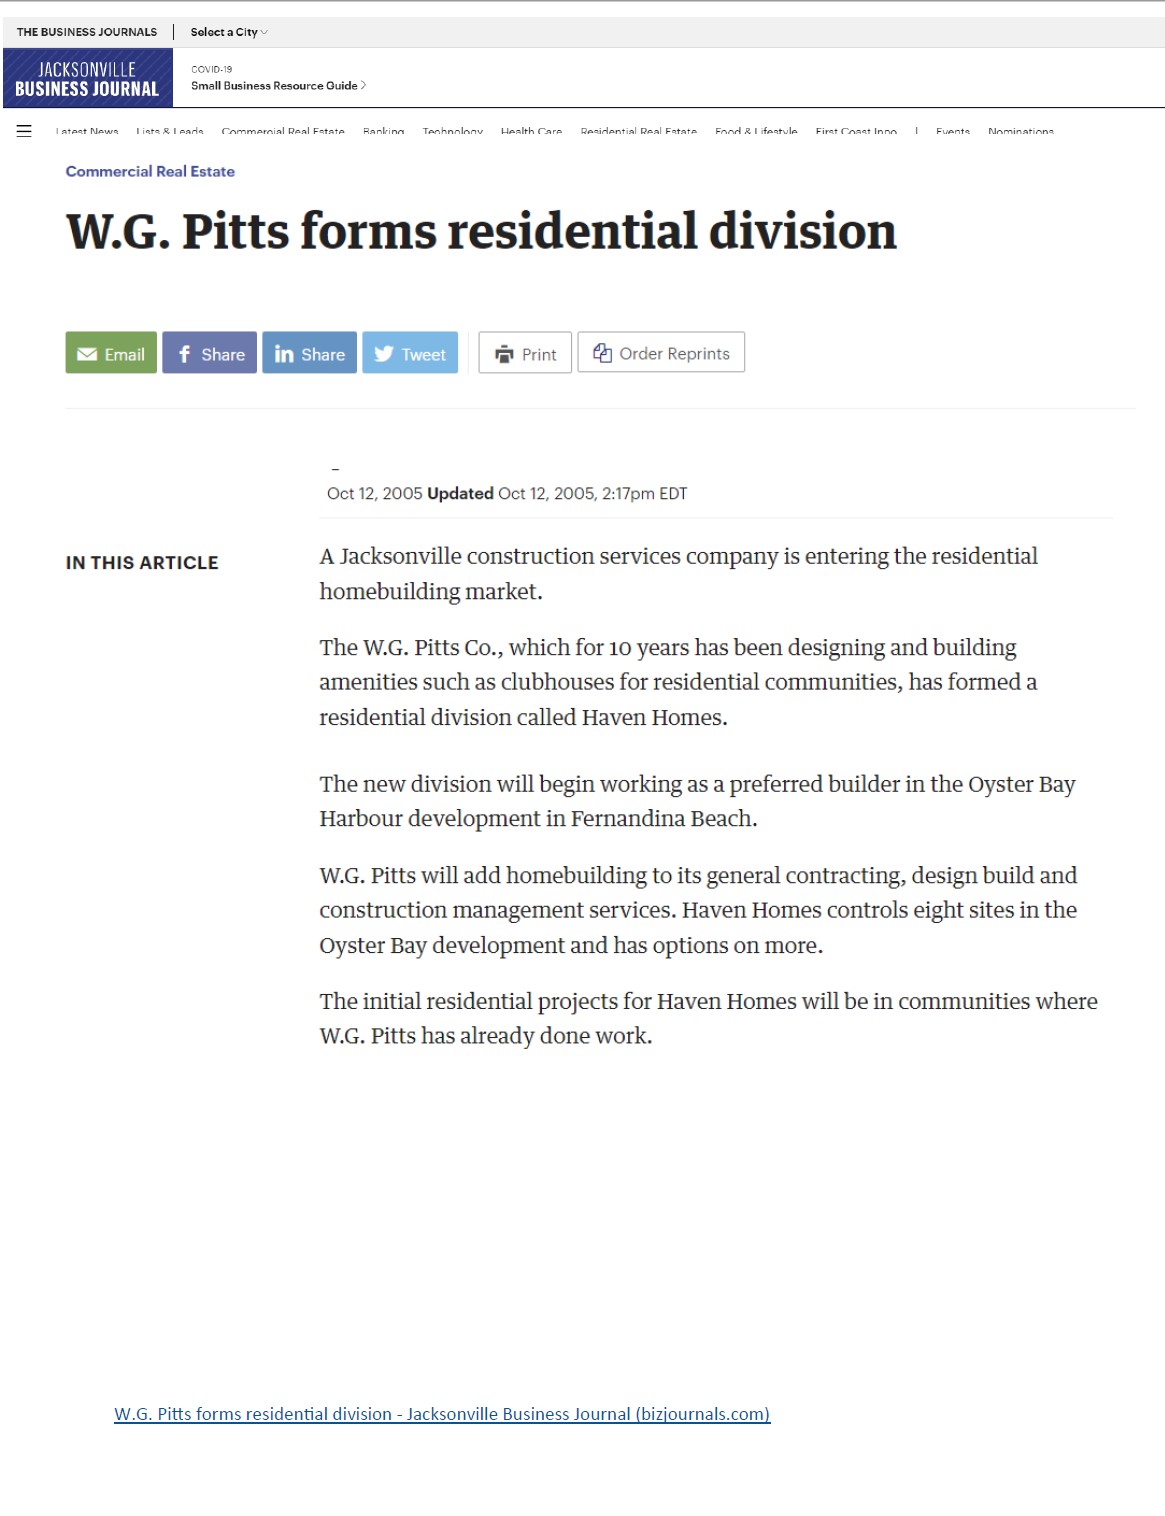 WGPITTS forms residential division